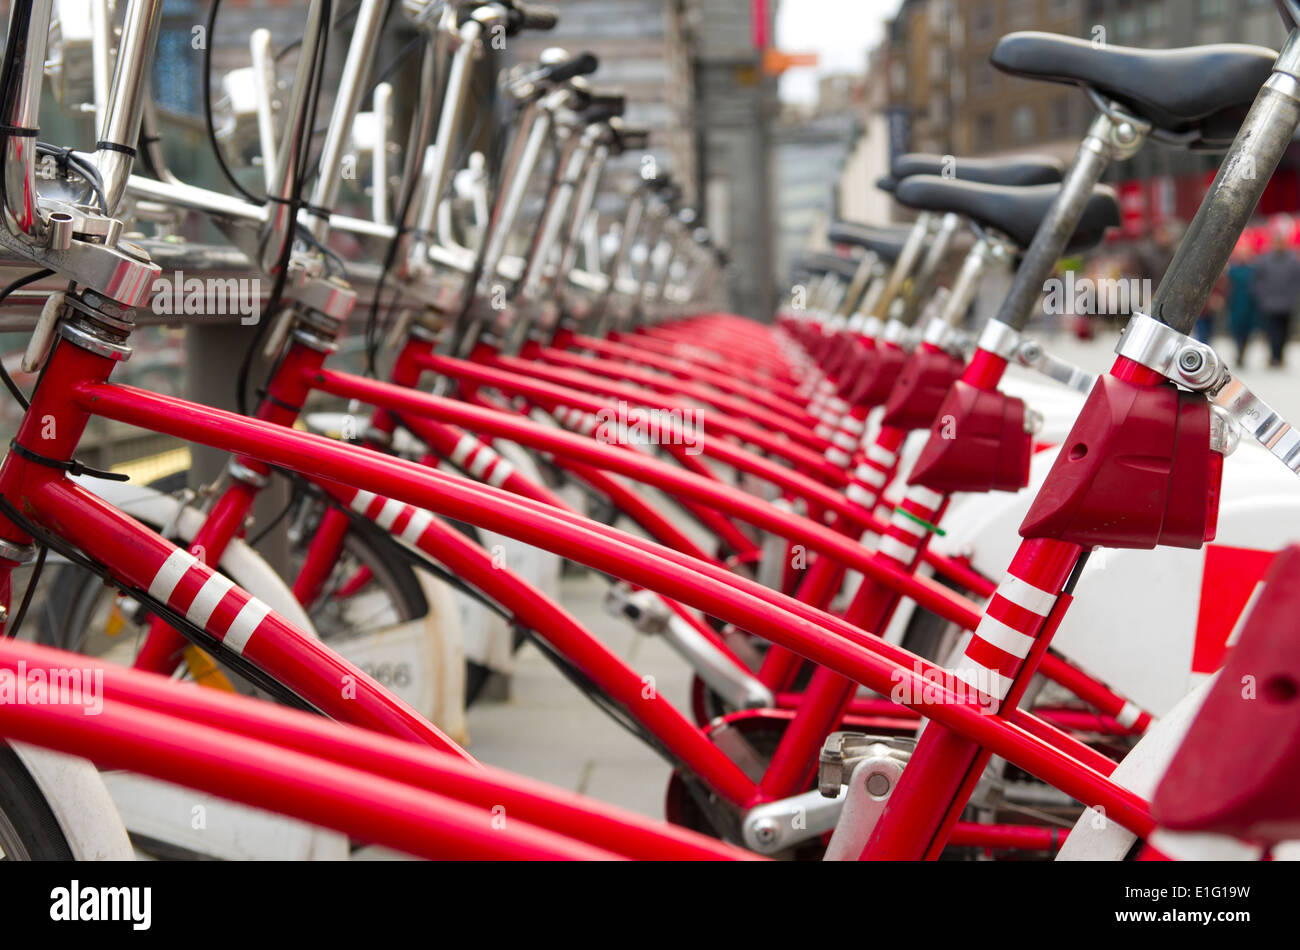 With 1000 bicycles and 80 stations, Velo is among largest bike sharing systems worldwide. Stock Photo